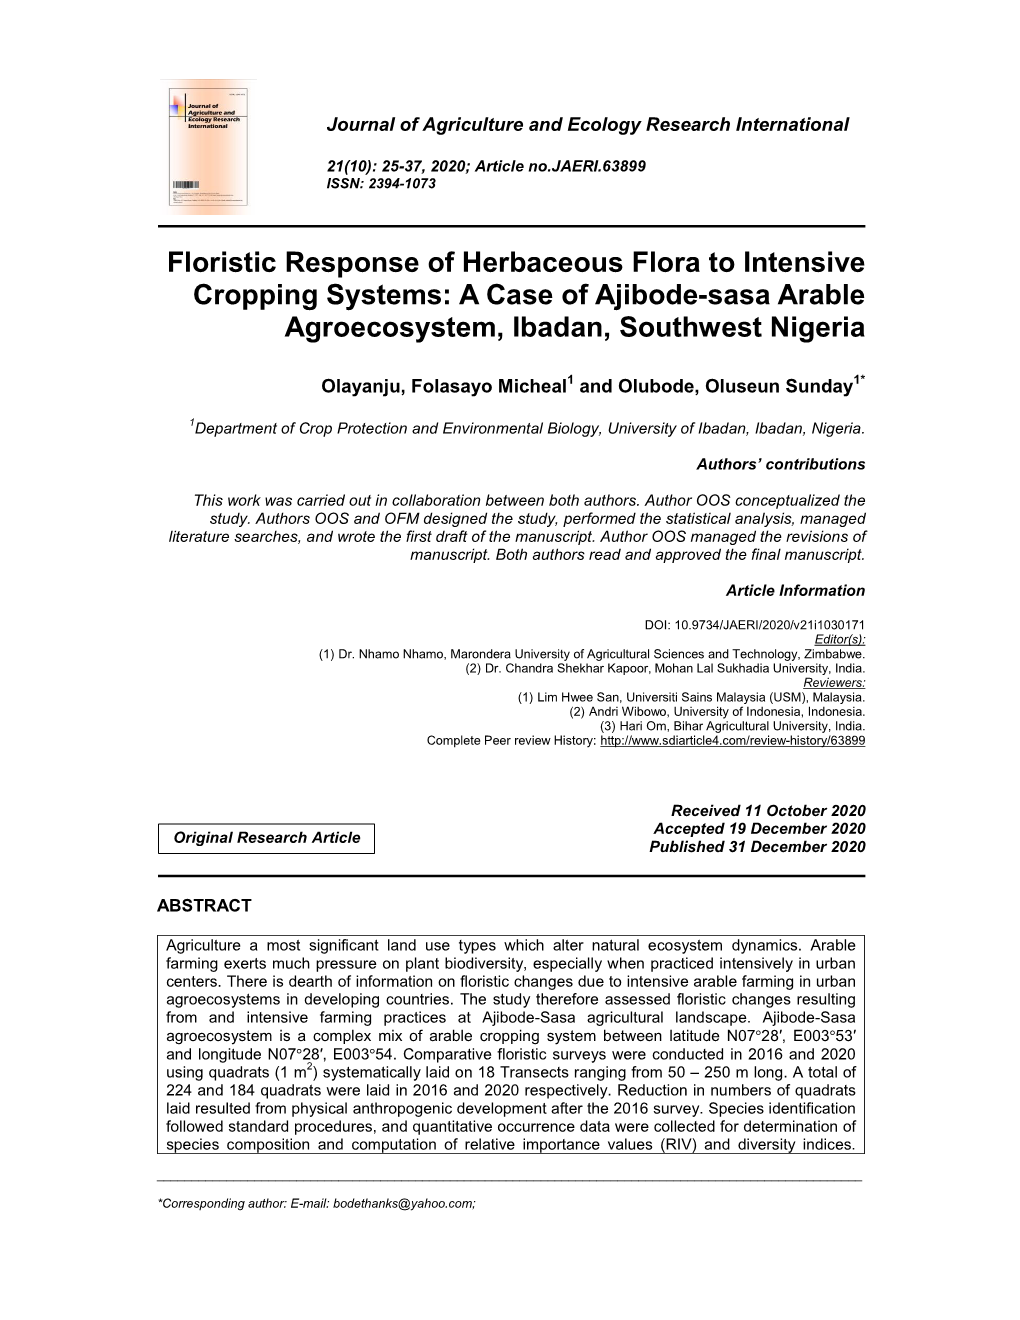 Floristic Response of Herbaceous Flora to Intensive Cropping Systems: a Case of Ajibode-Sasa Arable Agroecosystem, Ibadan, Southwest Nigeria